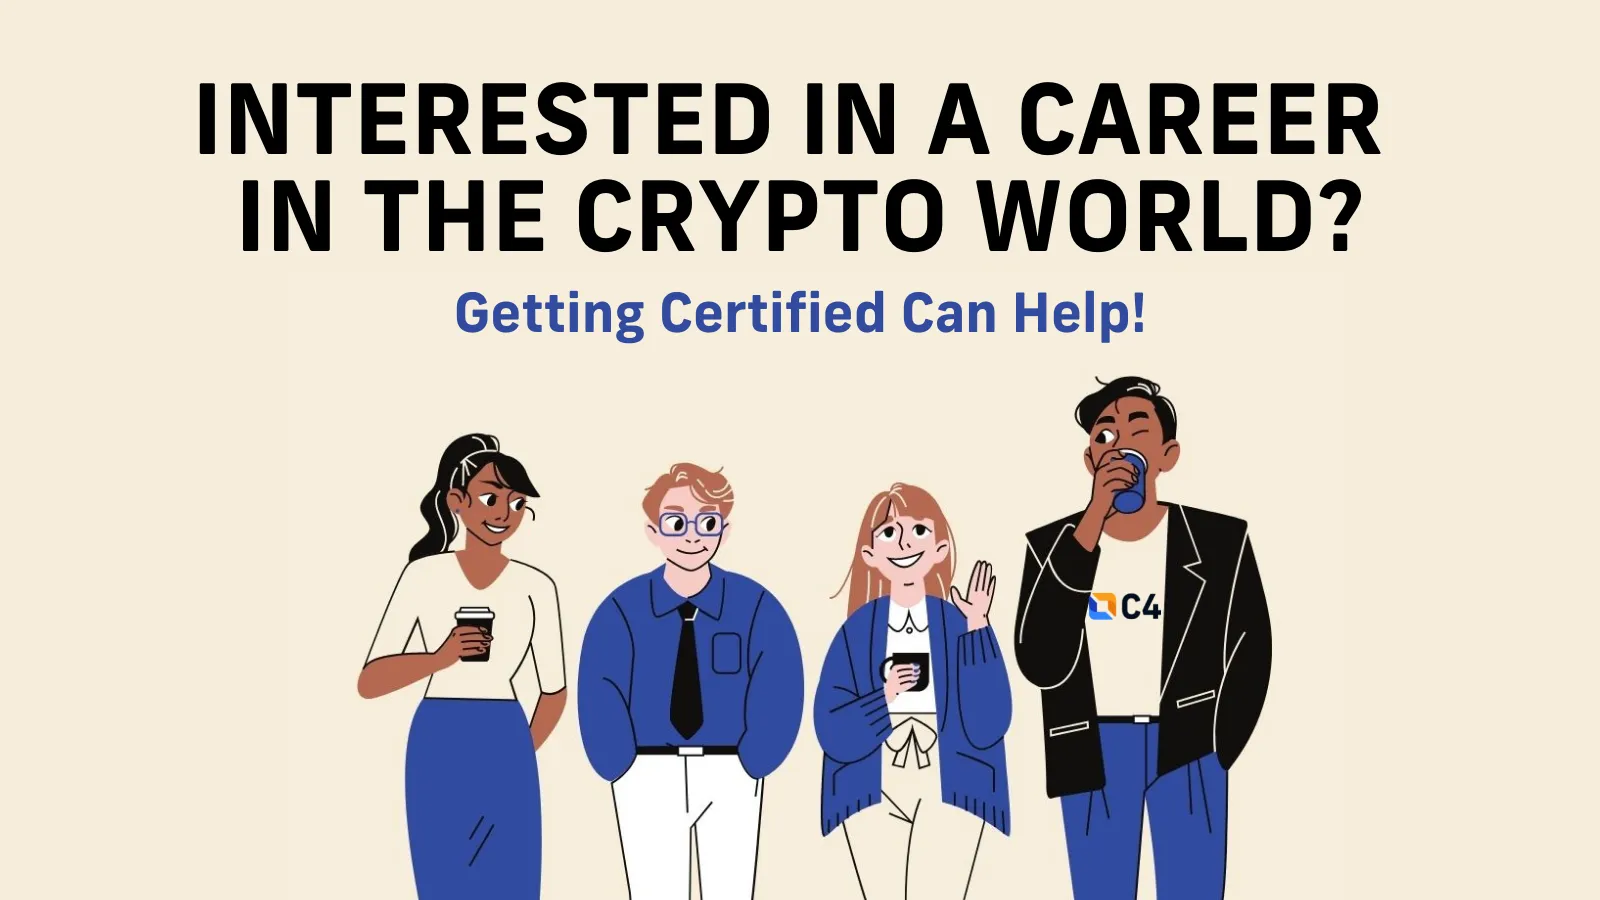 Career Possibilities for the Non-Technical Crypto Enthusiast